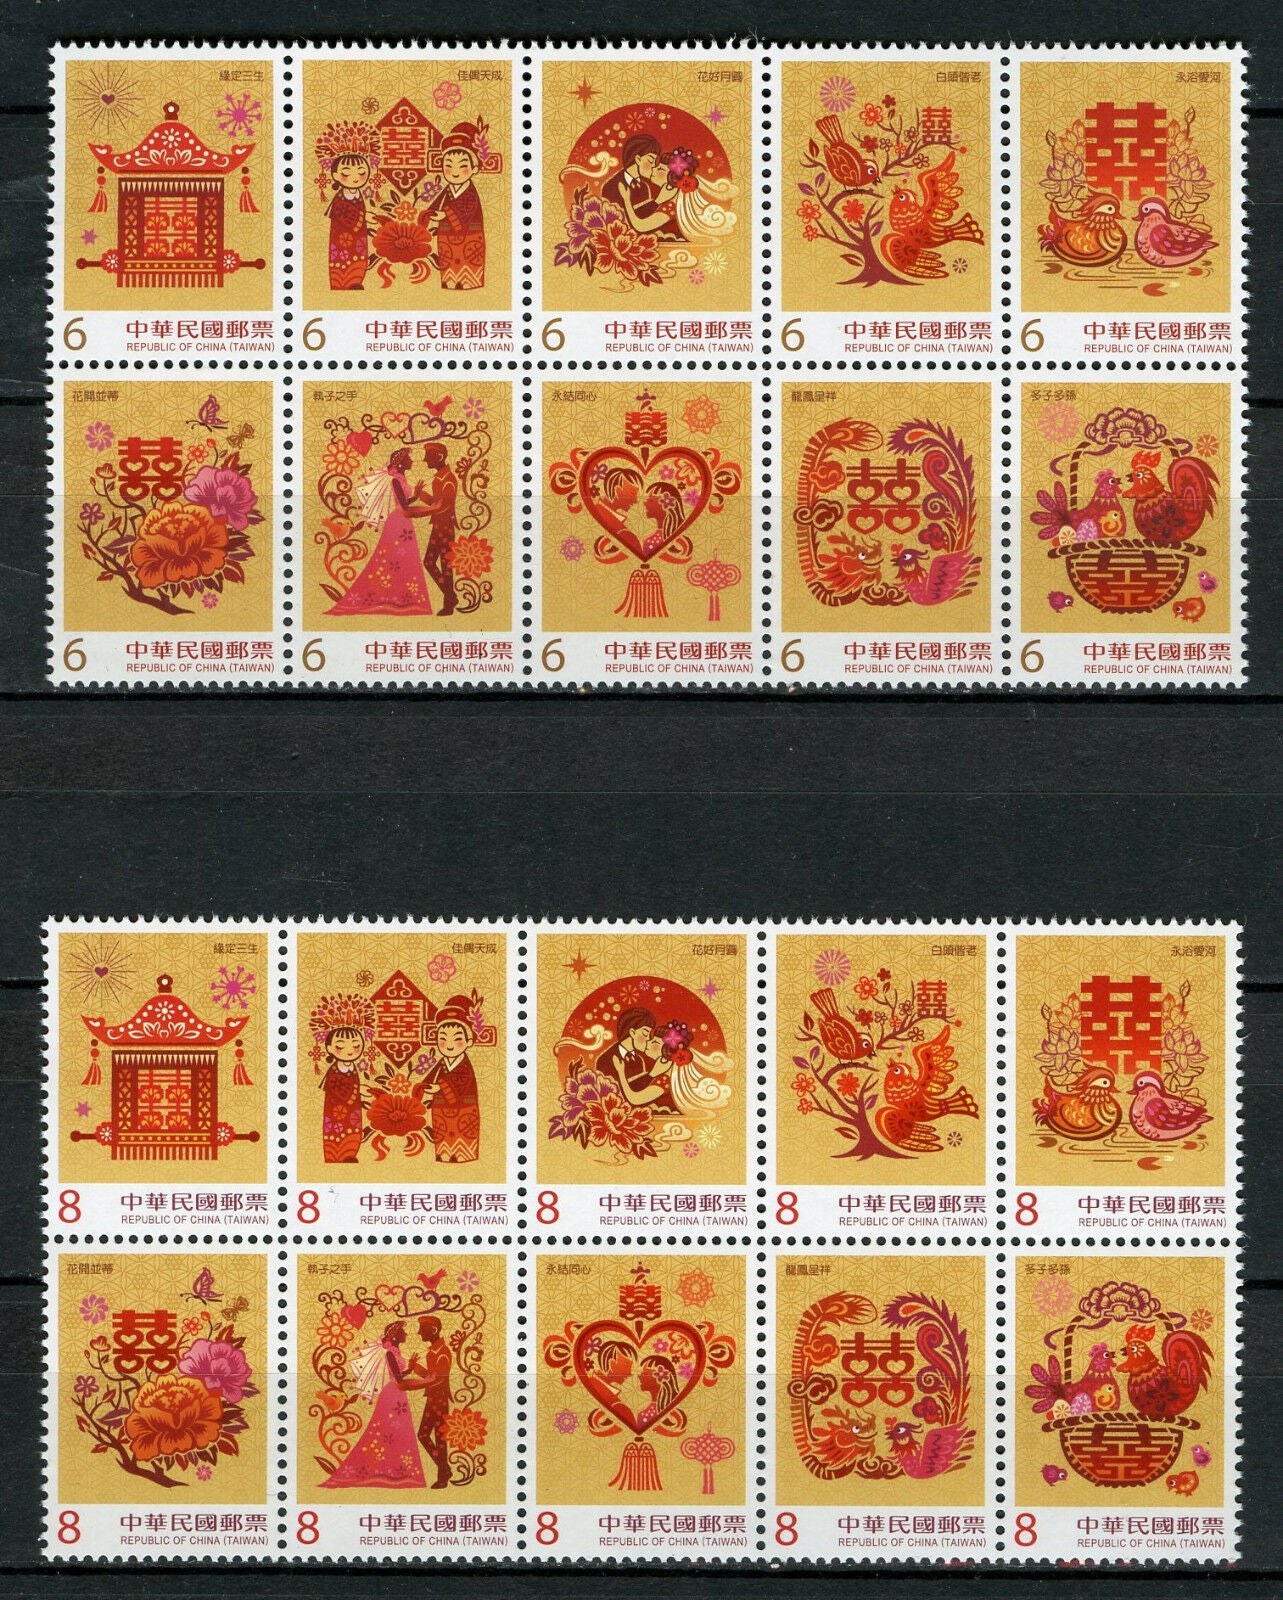 Taiwan China 2018 MNH Wedding Greetings 2x 10v Block Cultures Traditions Stamps